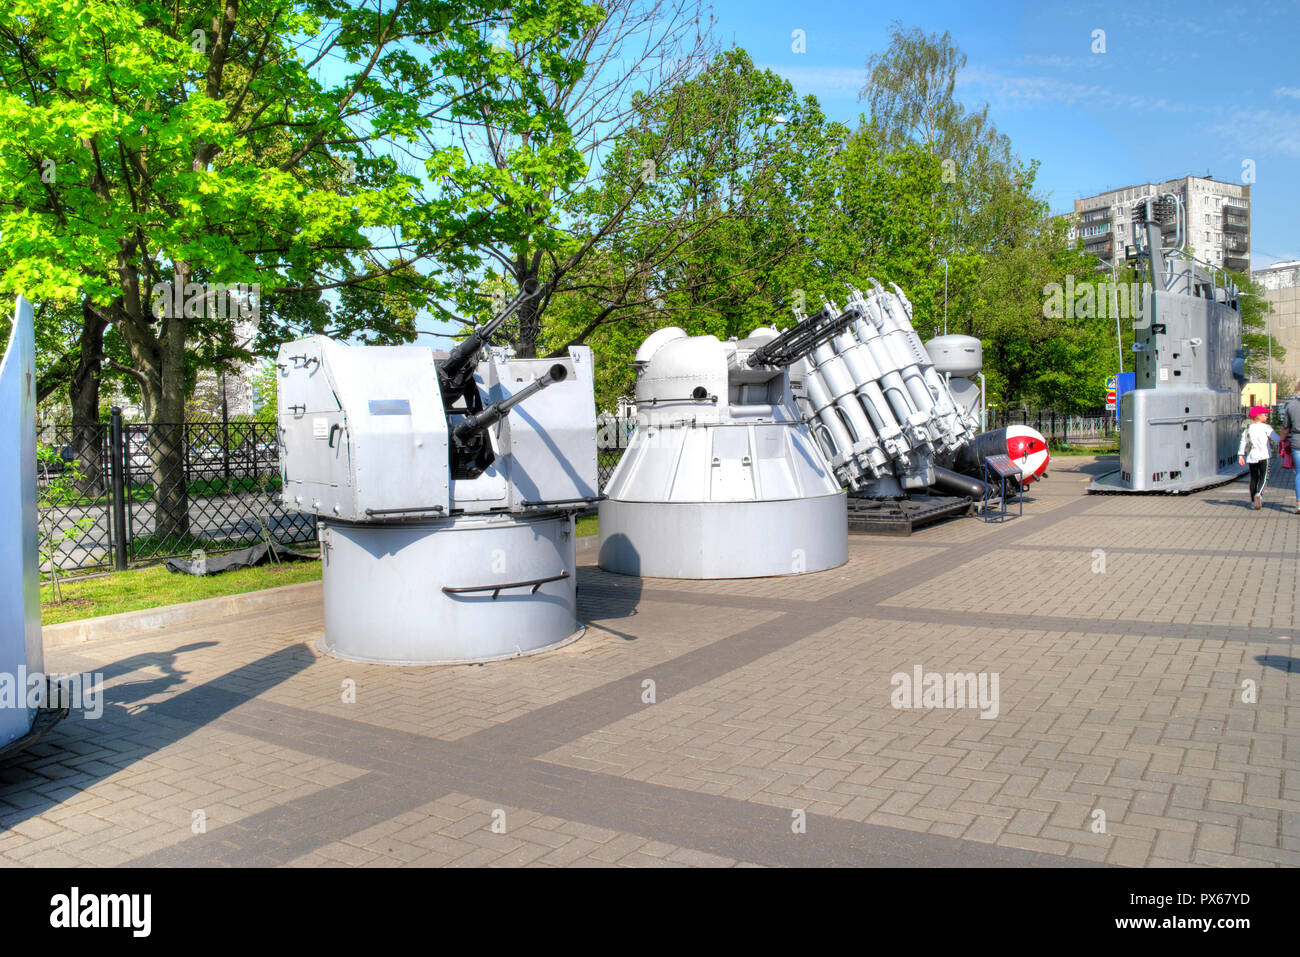 KALININGRAD, RUSSIA - April 30.2018: Exhibition buildings and exhibits on the territory of the Museum of the World Ocean. Twin anti-aircraft machine g Stock Photo